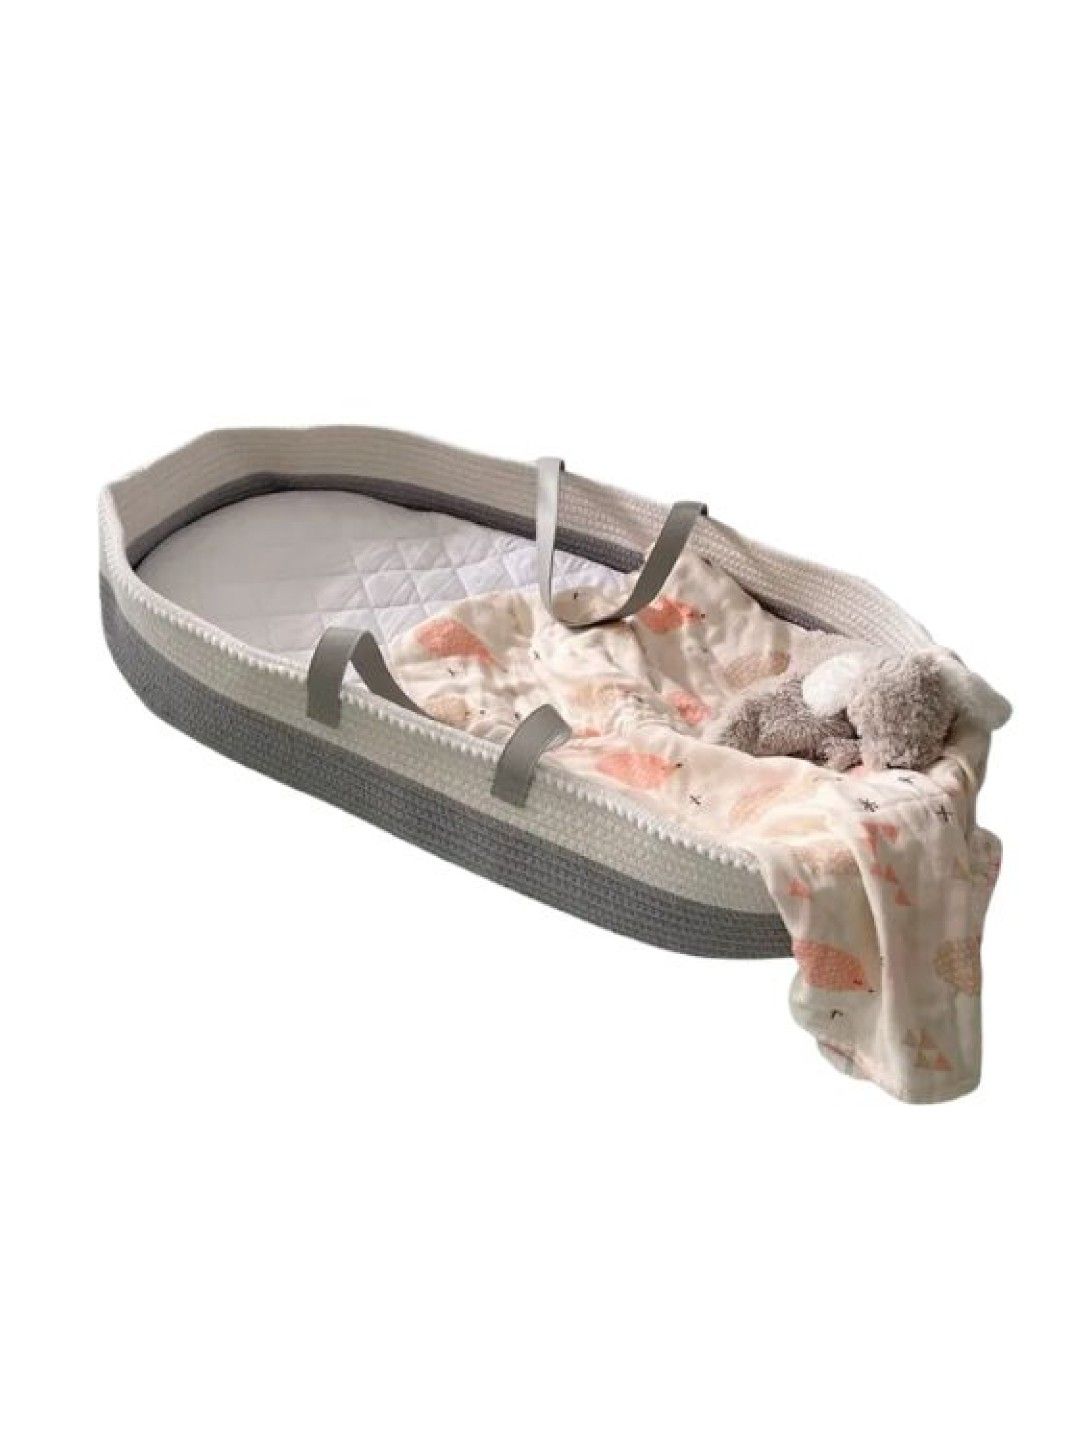 The Baby Basket Portable Gray Woven Moses Baby Basket